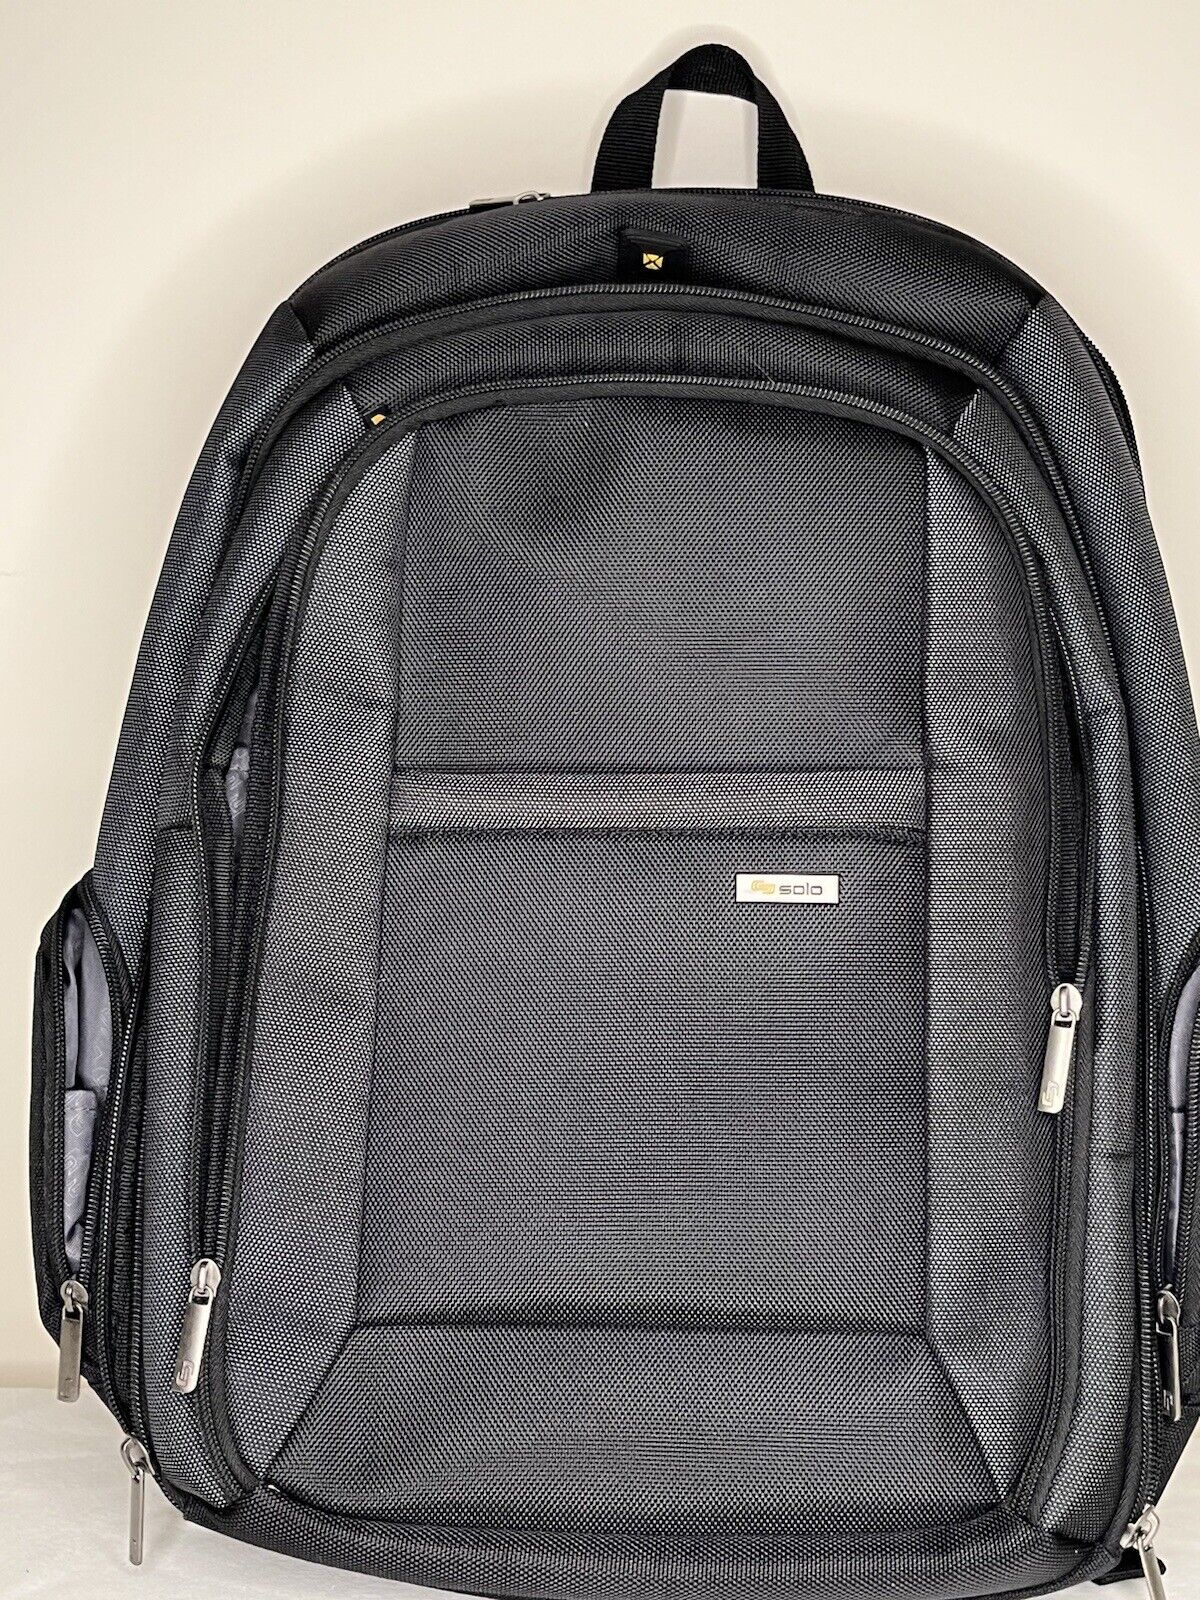 Solo New York Laptop Backpack,Black/Grey CLA703-4D w/ Laptop Sleeve New W/O Tags